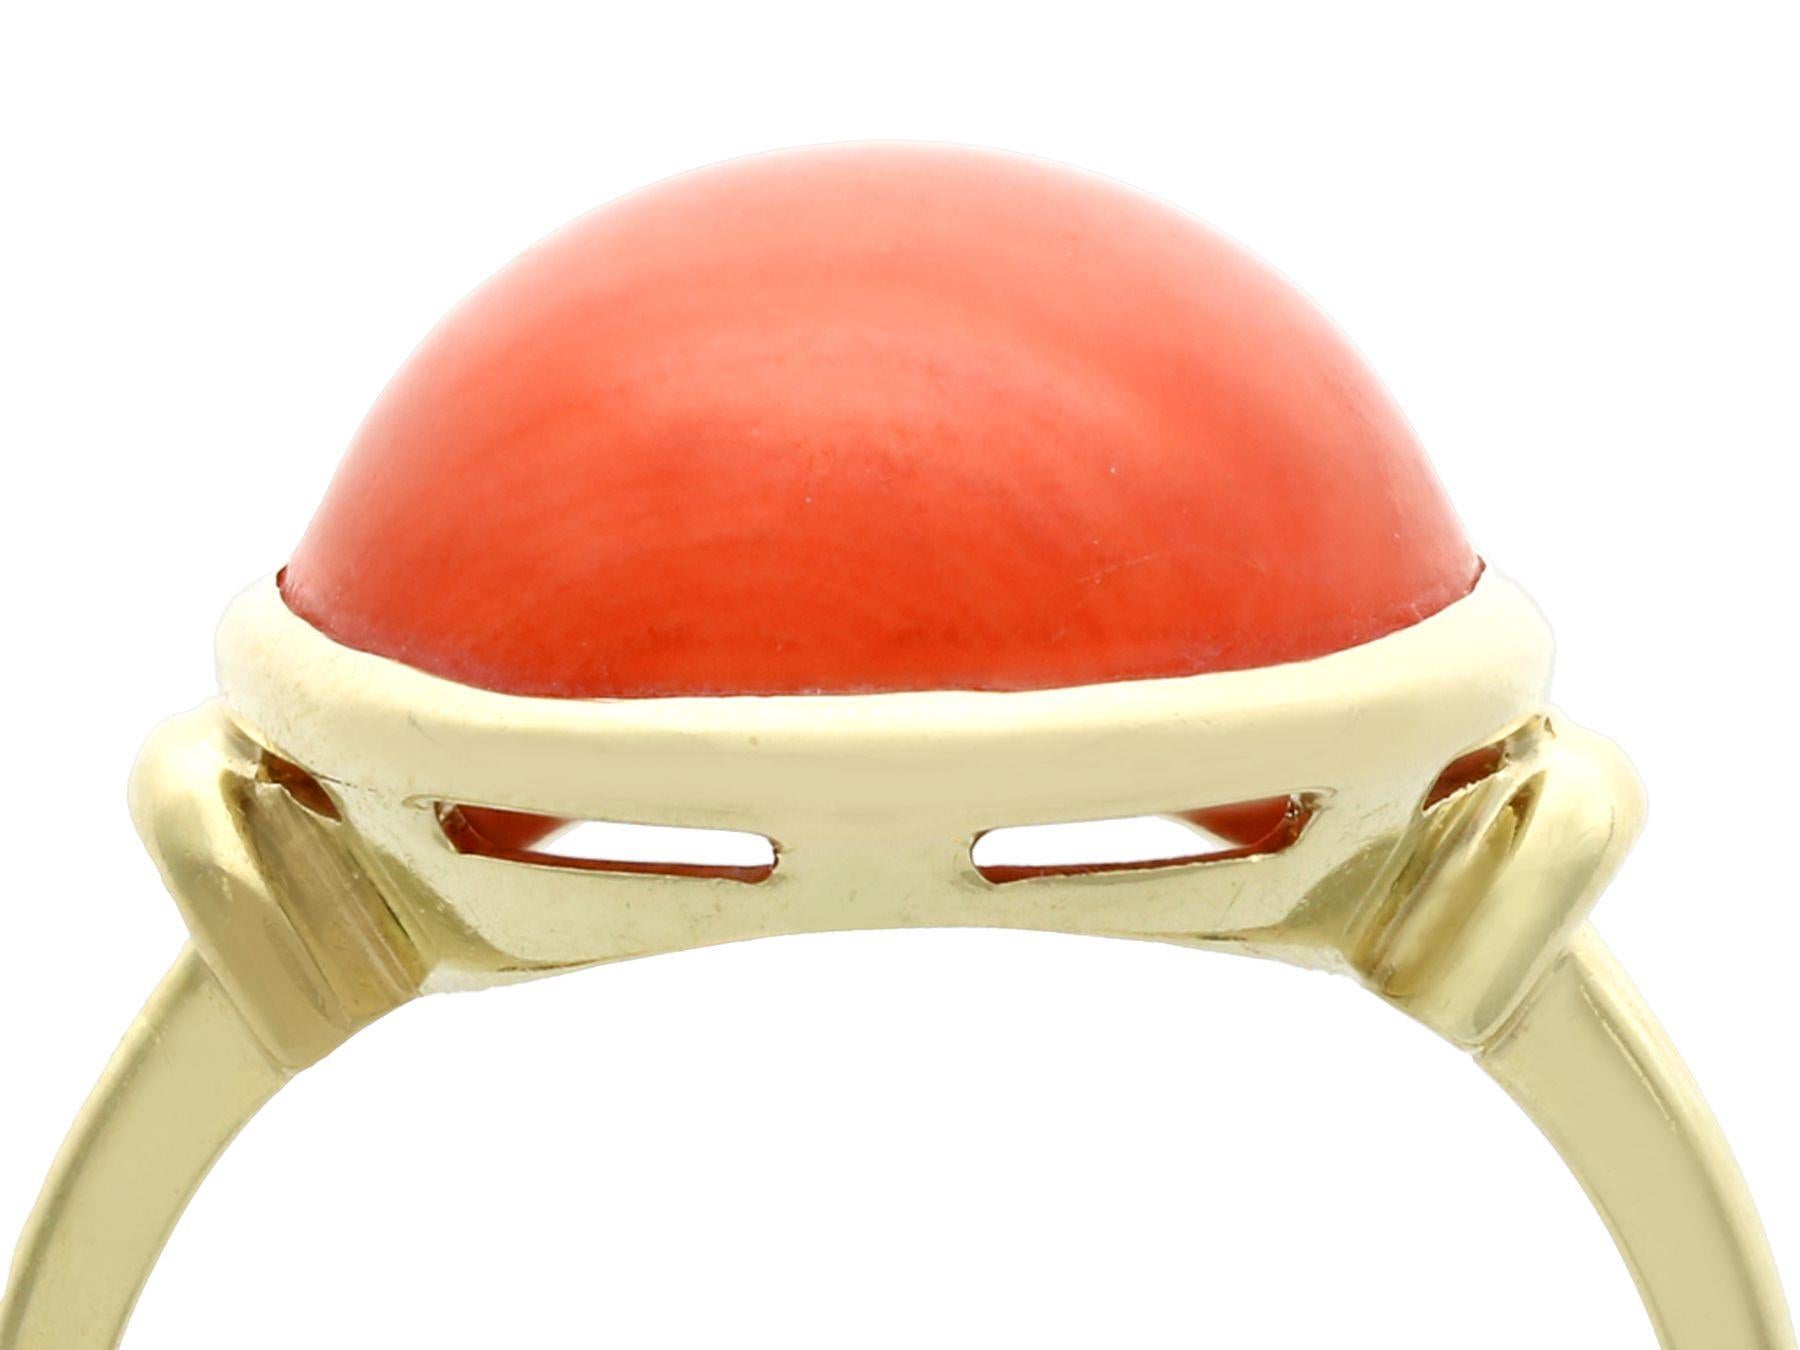 A fine and impressive vintage 13.20 carat coral and 14 karat yellow gold cocktail ring; part of our diverse gemstone jewelry collections.

This impressive 1950s vintage cabochon cut ring has been crafted in 14k yellow gold.

The simple yet